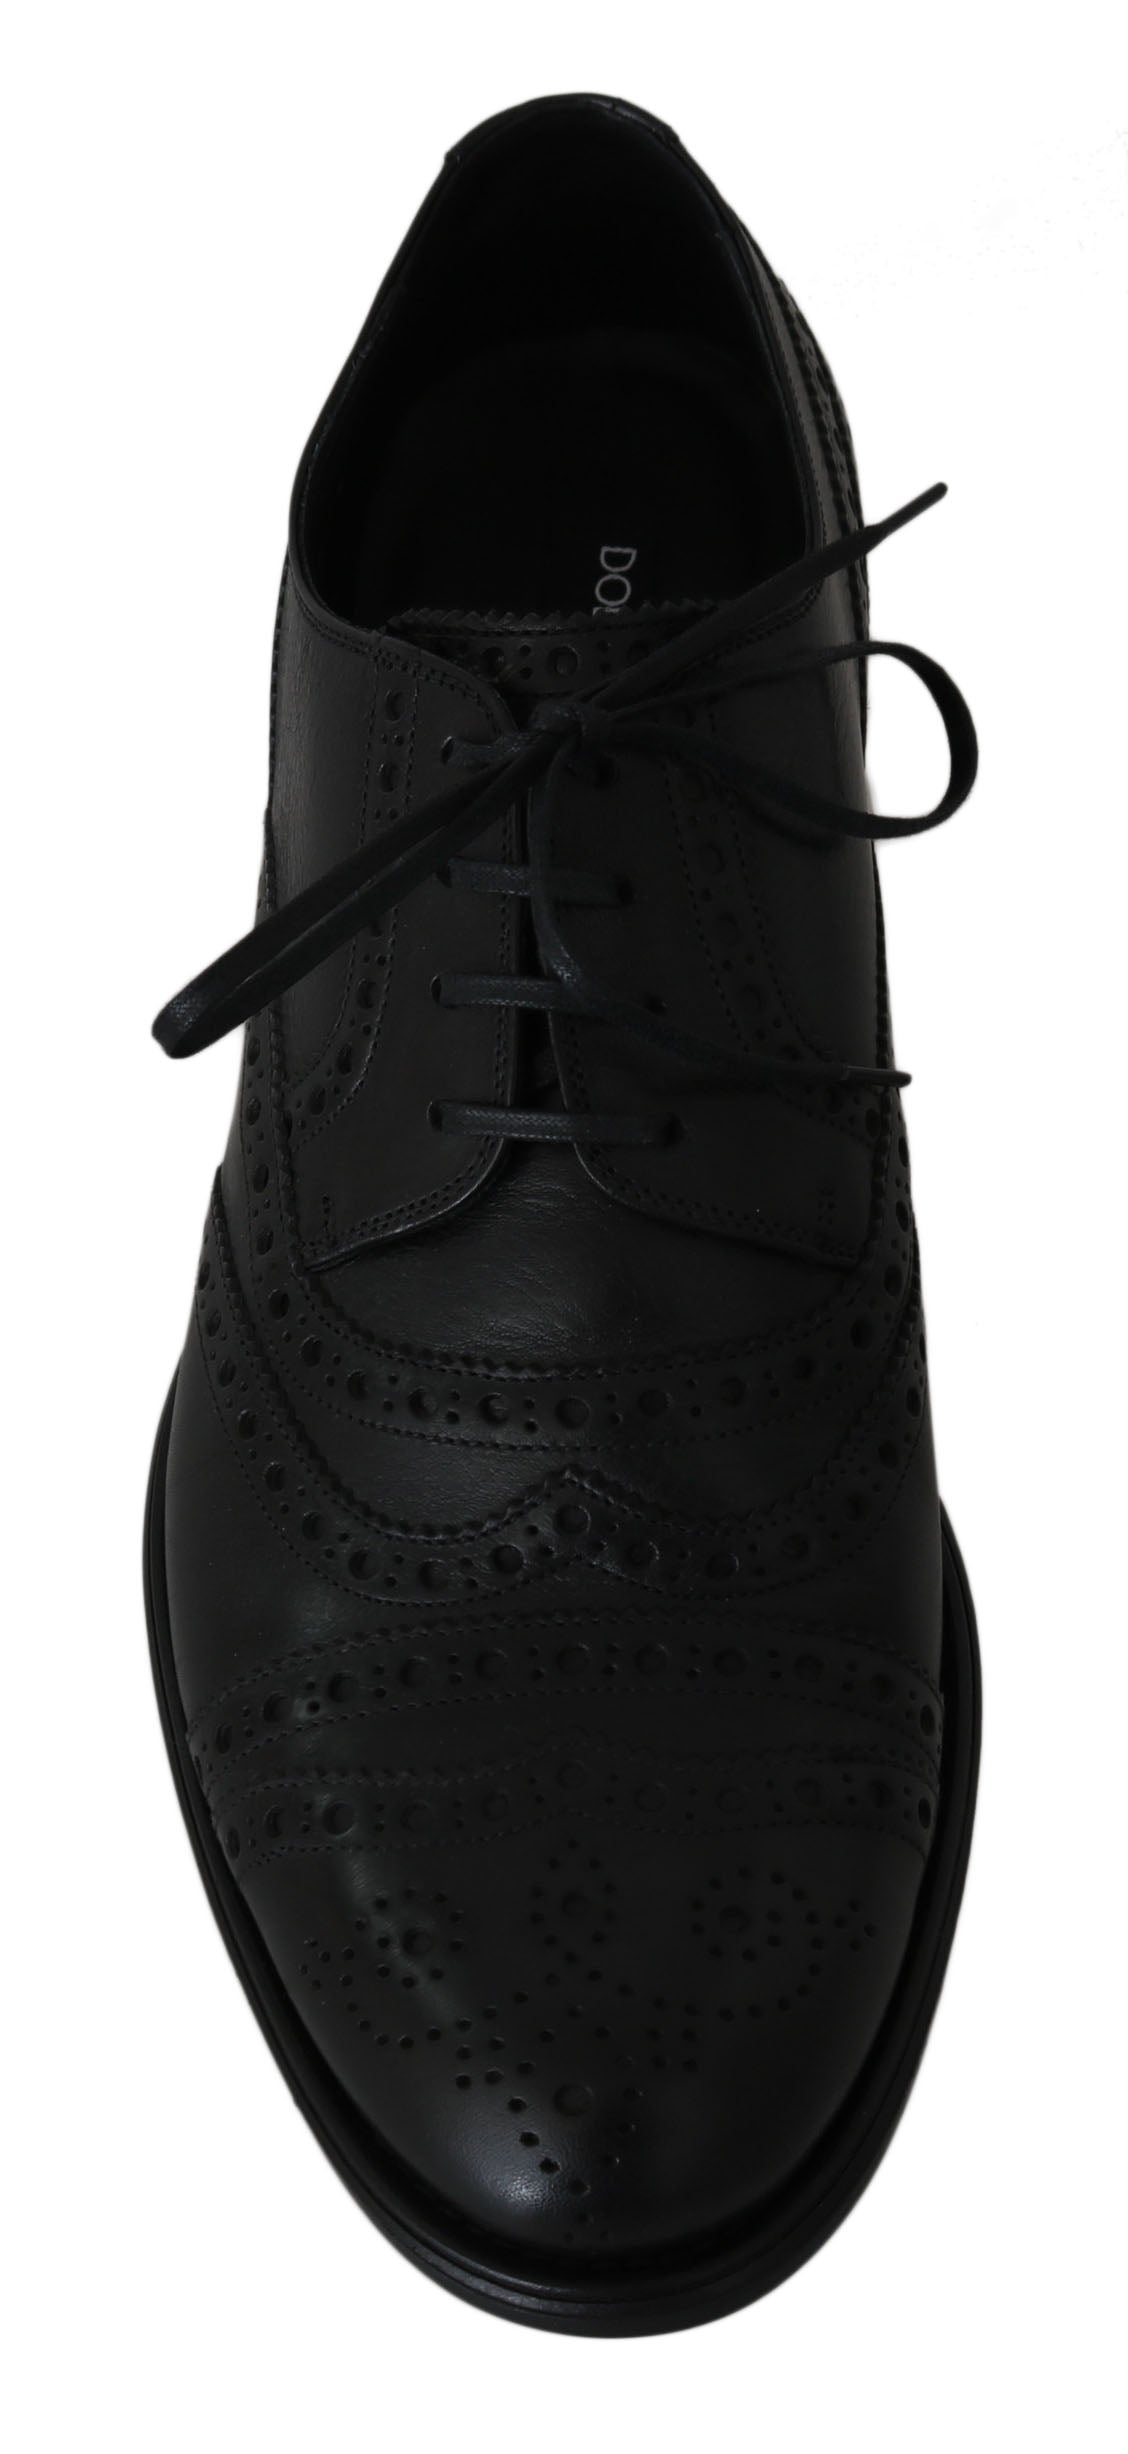 Dolce & Gabbana Black Leather Wingtip Oxford Dress Shoes - Designed by Dolce & Gabbana Available to Buy at a Discounted Price on Moon Behind The Hill Online Designer Discount Store